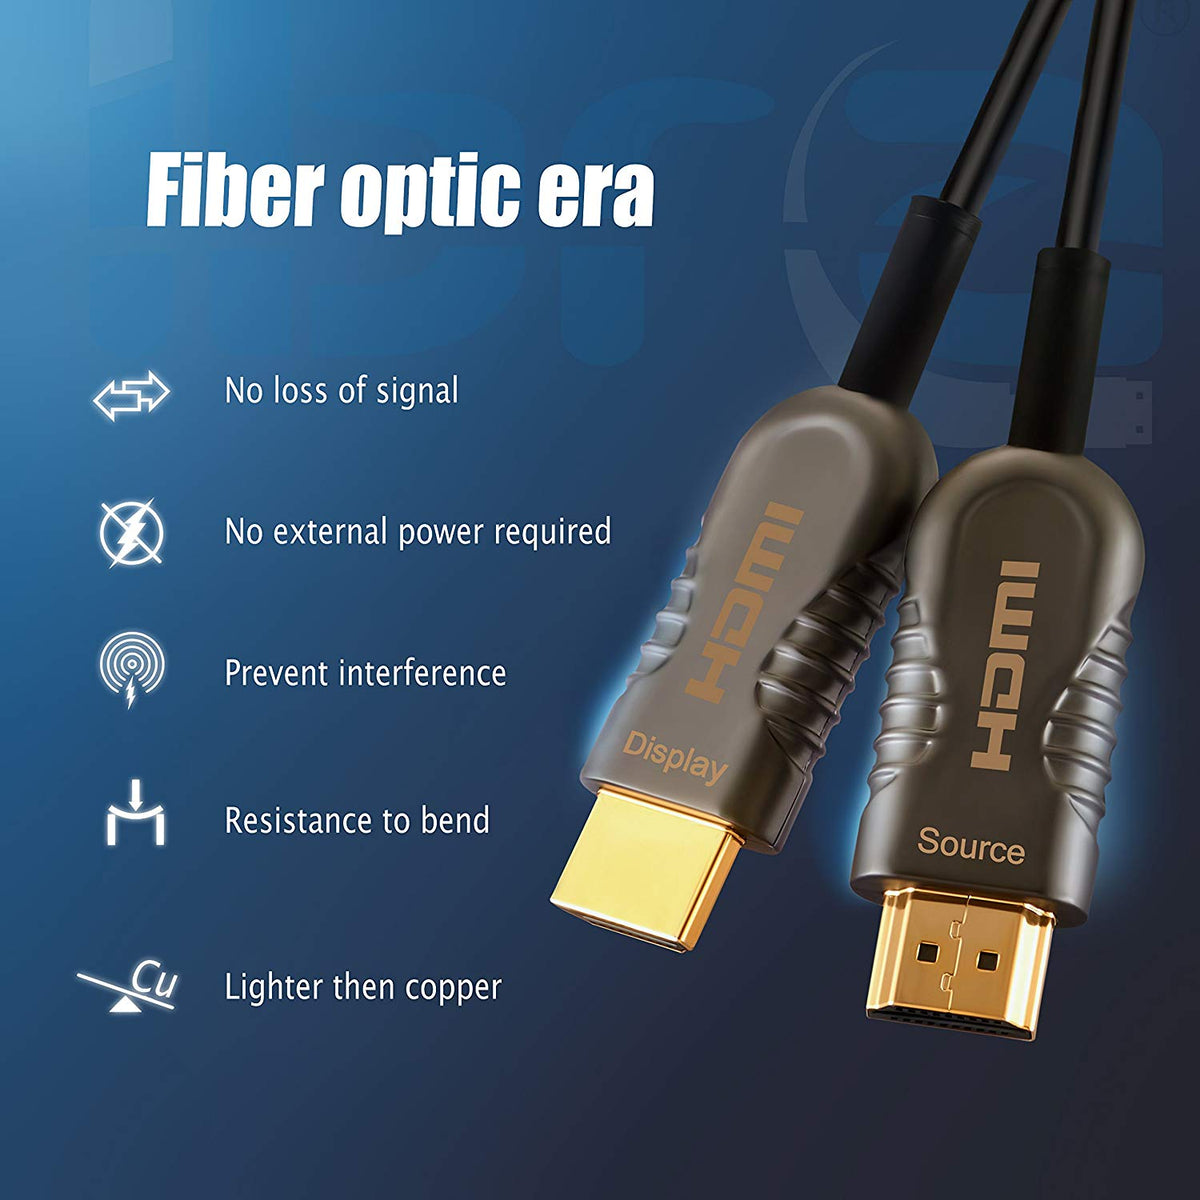 5M Fiber Optic HDMI High Speed Cable v2.0 18Gbps HDMI Lead Support 4K@60Hz/4:4:4/3D/4K HDR HDCP 2.2 for Apple TV, HDTV, Roku TV Box, Xbox One X, Home Theater, PS4, PS3 etc - IBRA OPTICAL HDMI Cable